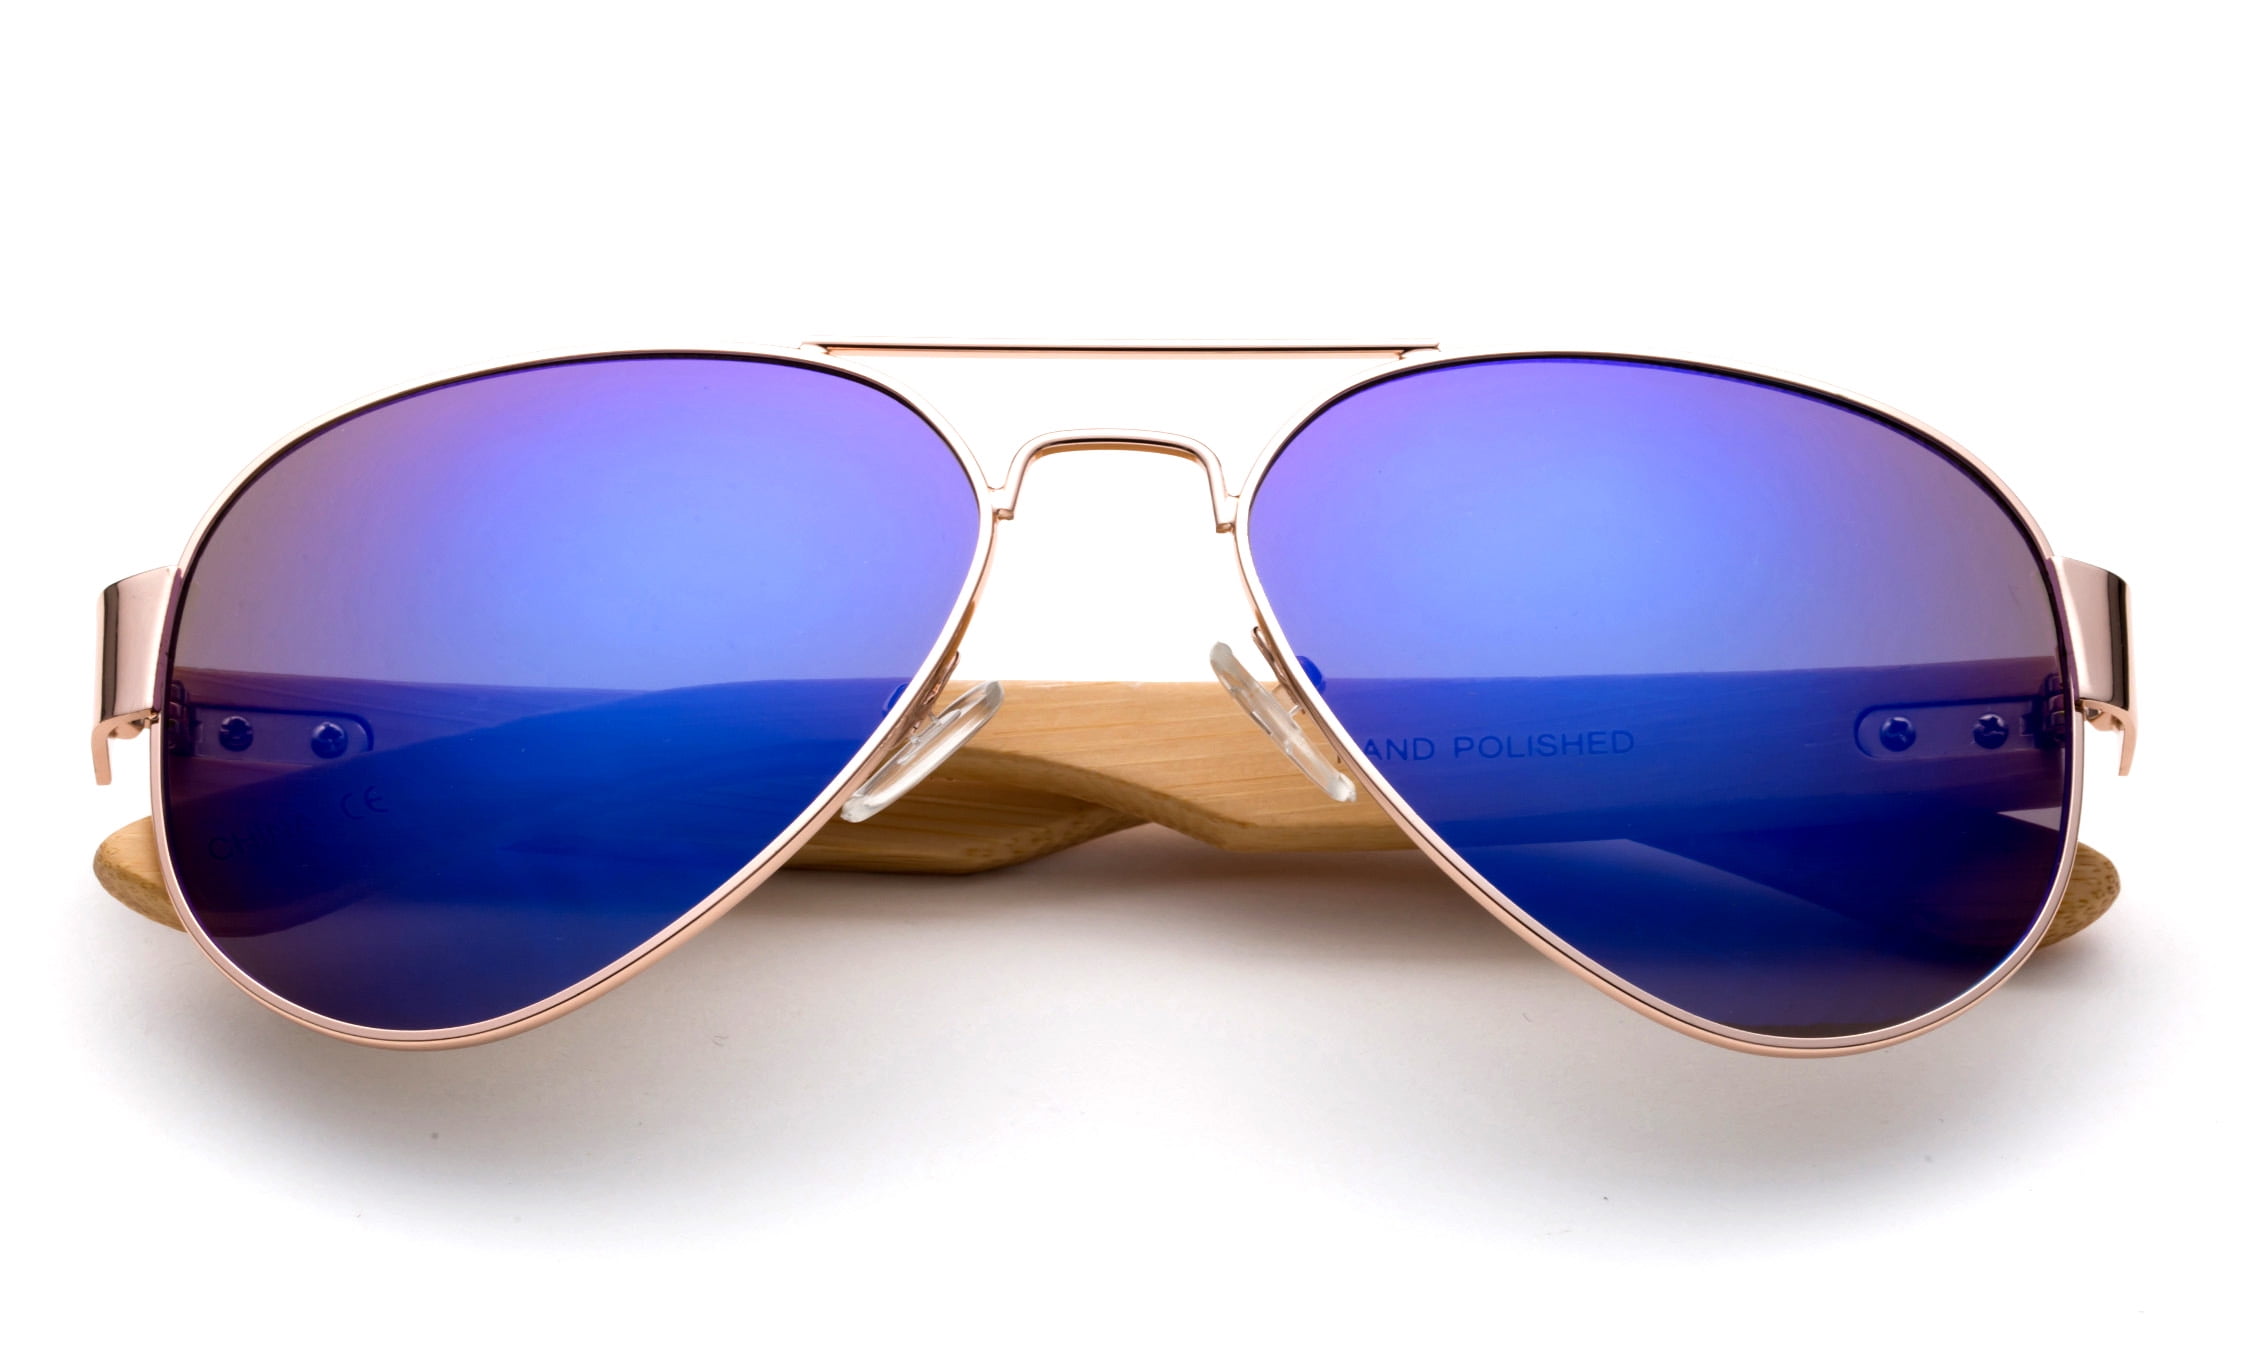 Sky Blue Mirror GOLD Metal Frame Aviator Large Big Sunglasses 1106 Small DEFECTS 